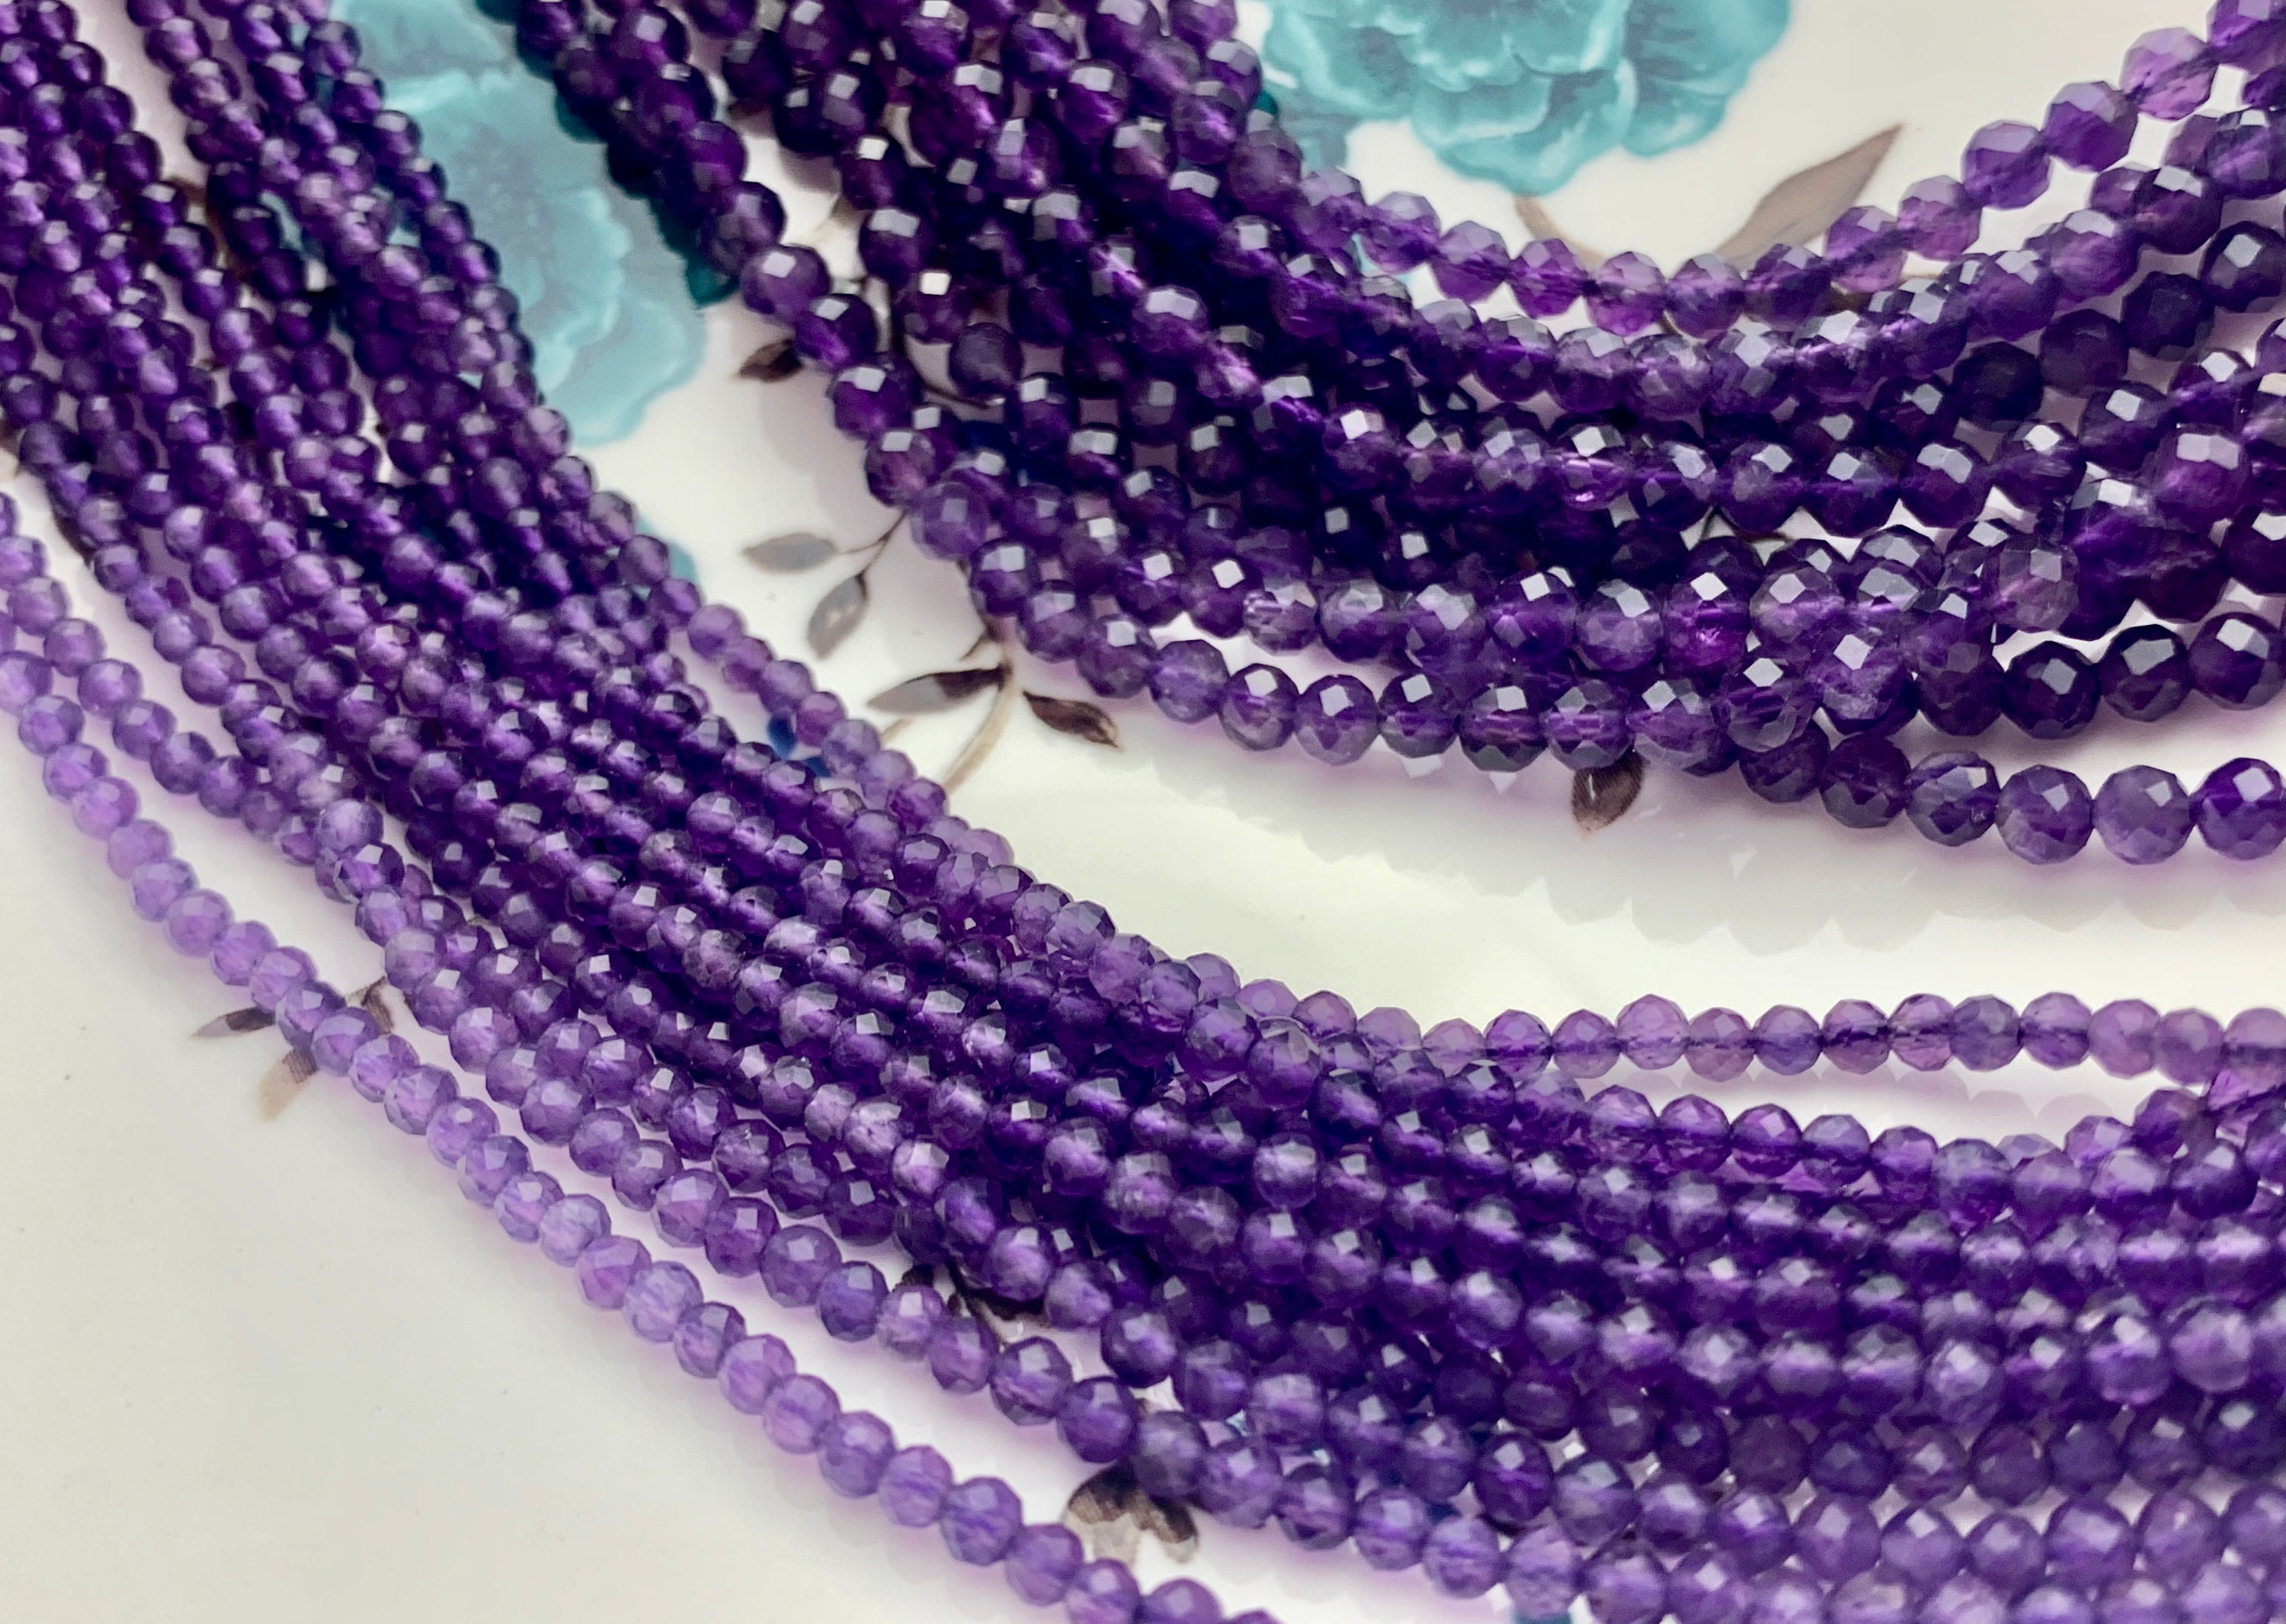 3mm 4mm AAA Natural Dark Purple Color Faceted Round Amethyst Gemstone Beads High Quality Micro Faceted Gemmy Amethyst Bead 15.5 Inches #3777